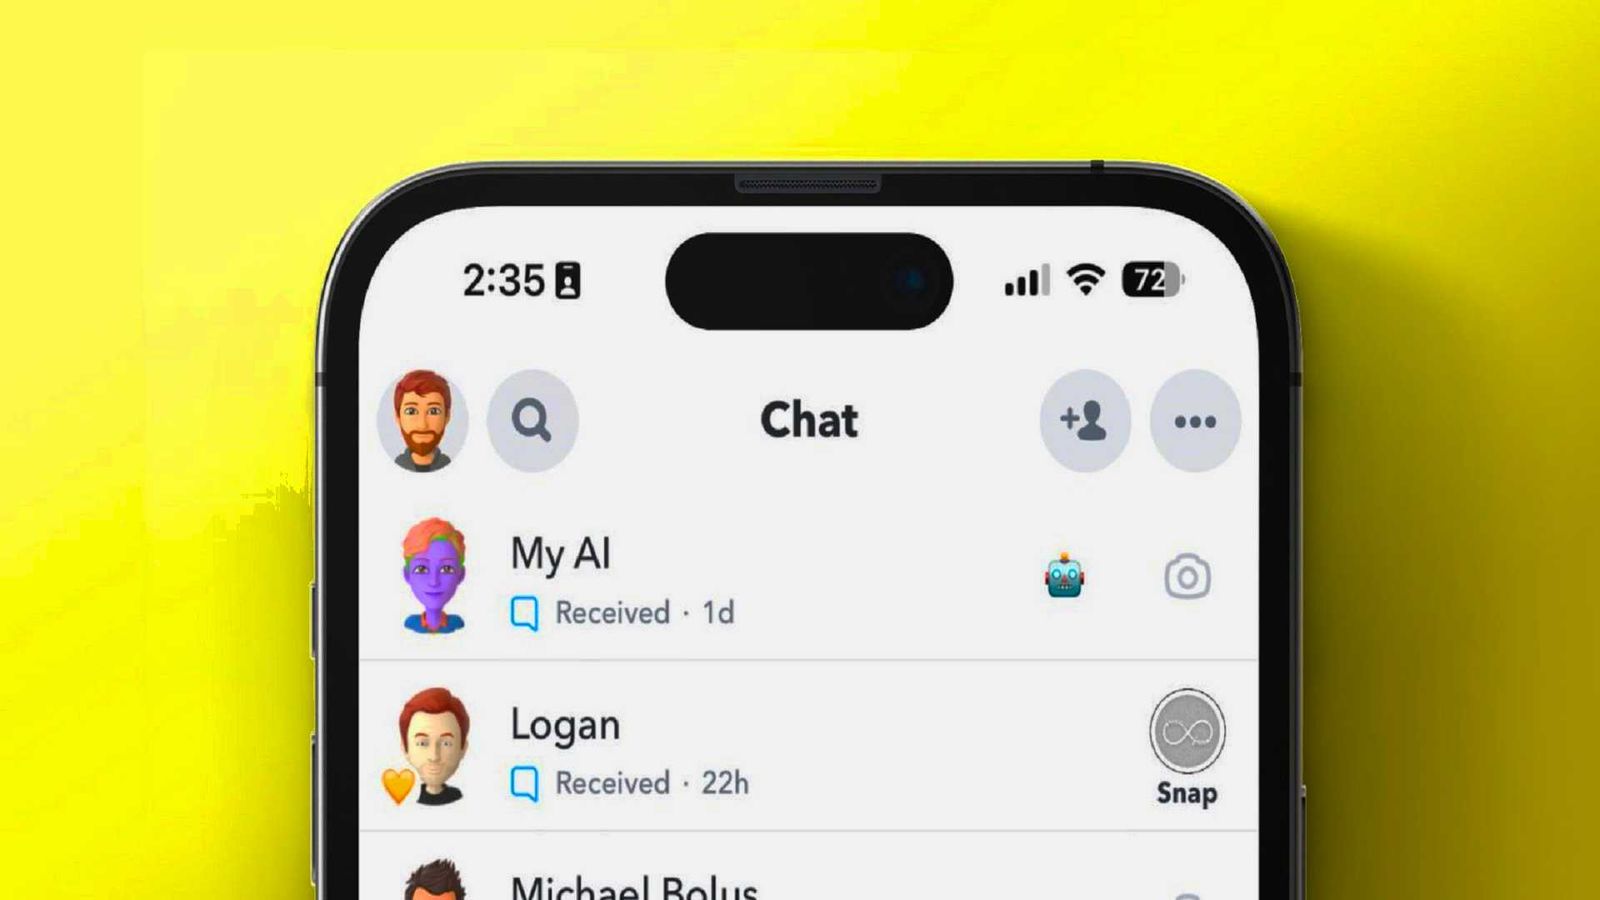 Why is My AI not showing up on Snapchat?